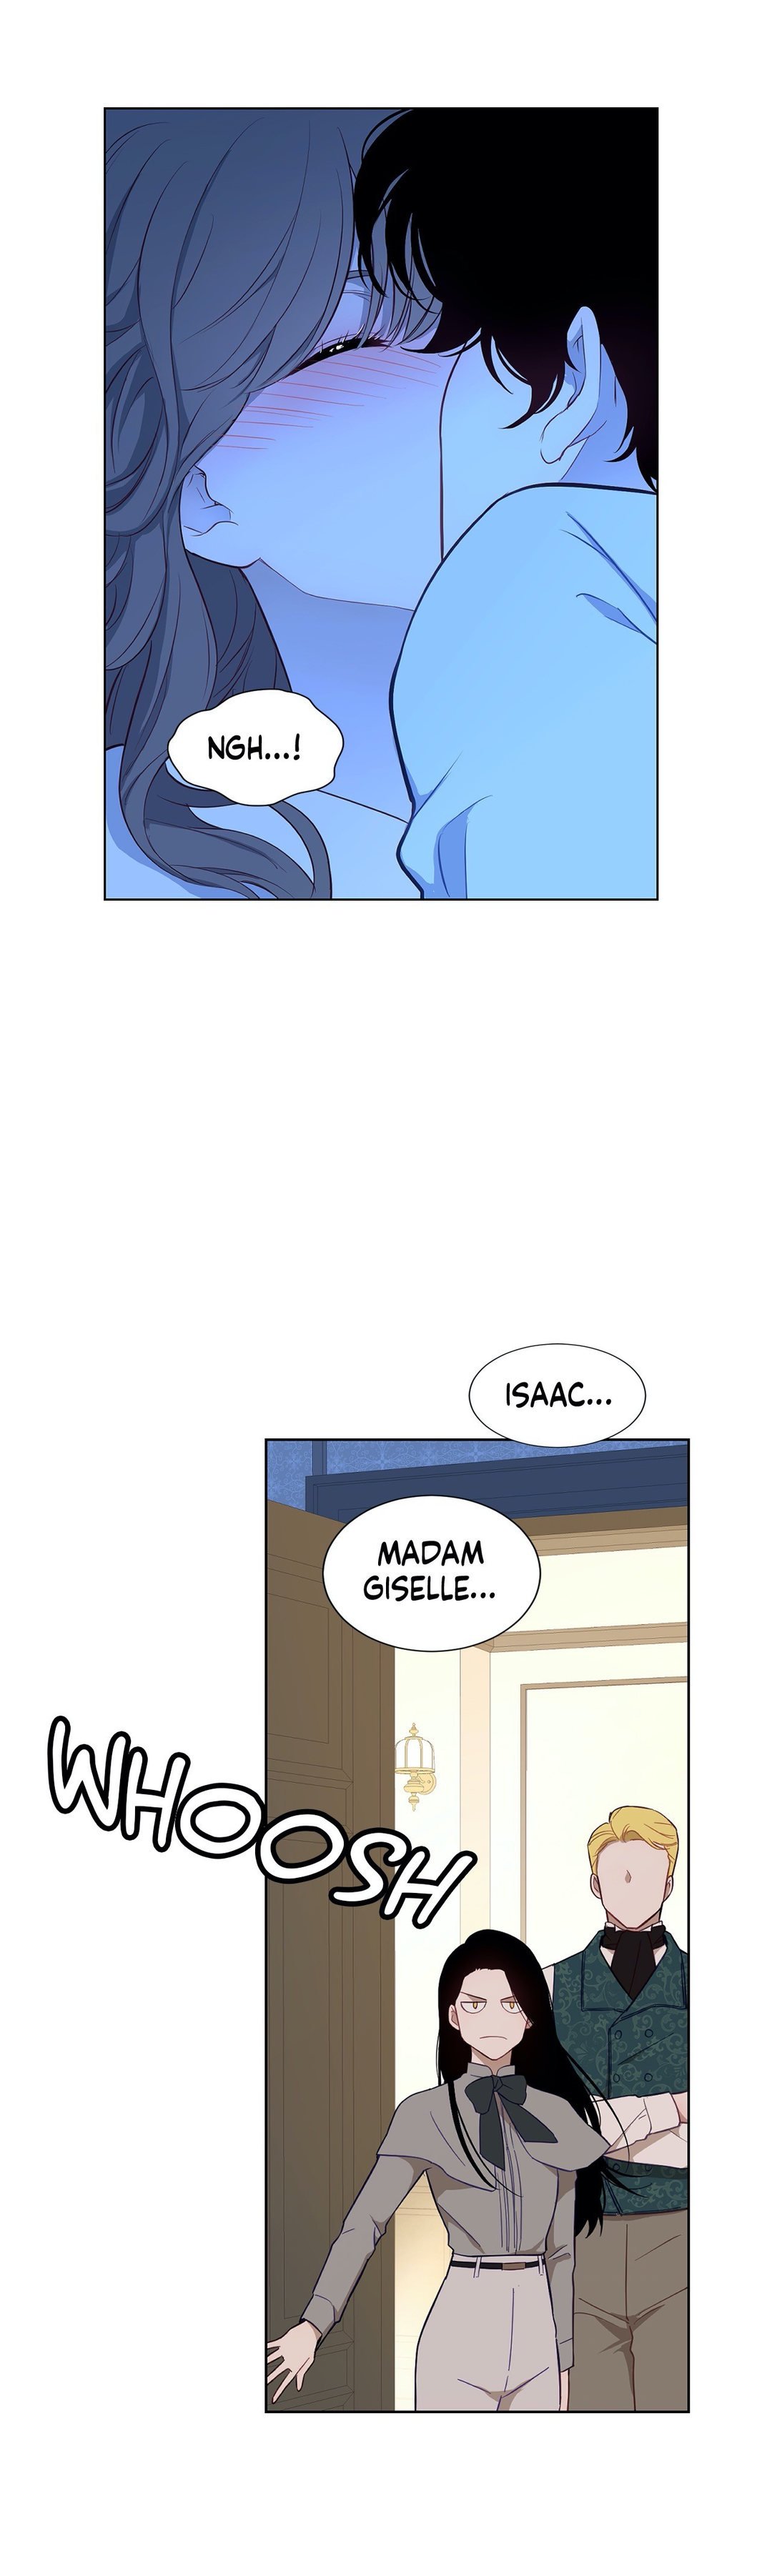 the-blood-of-madam-giselle-chap-48-24